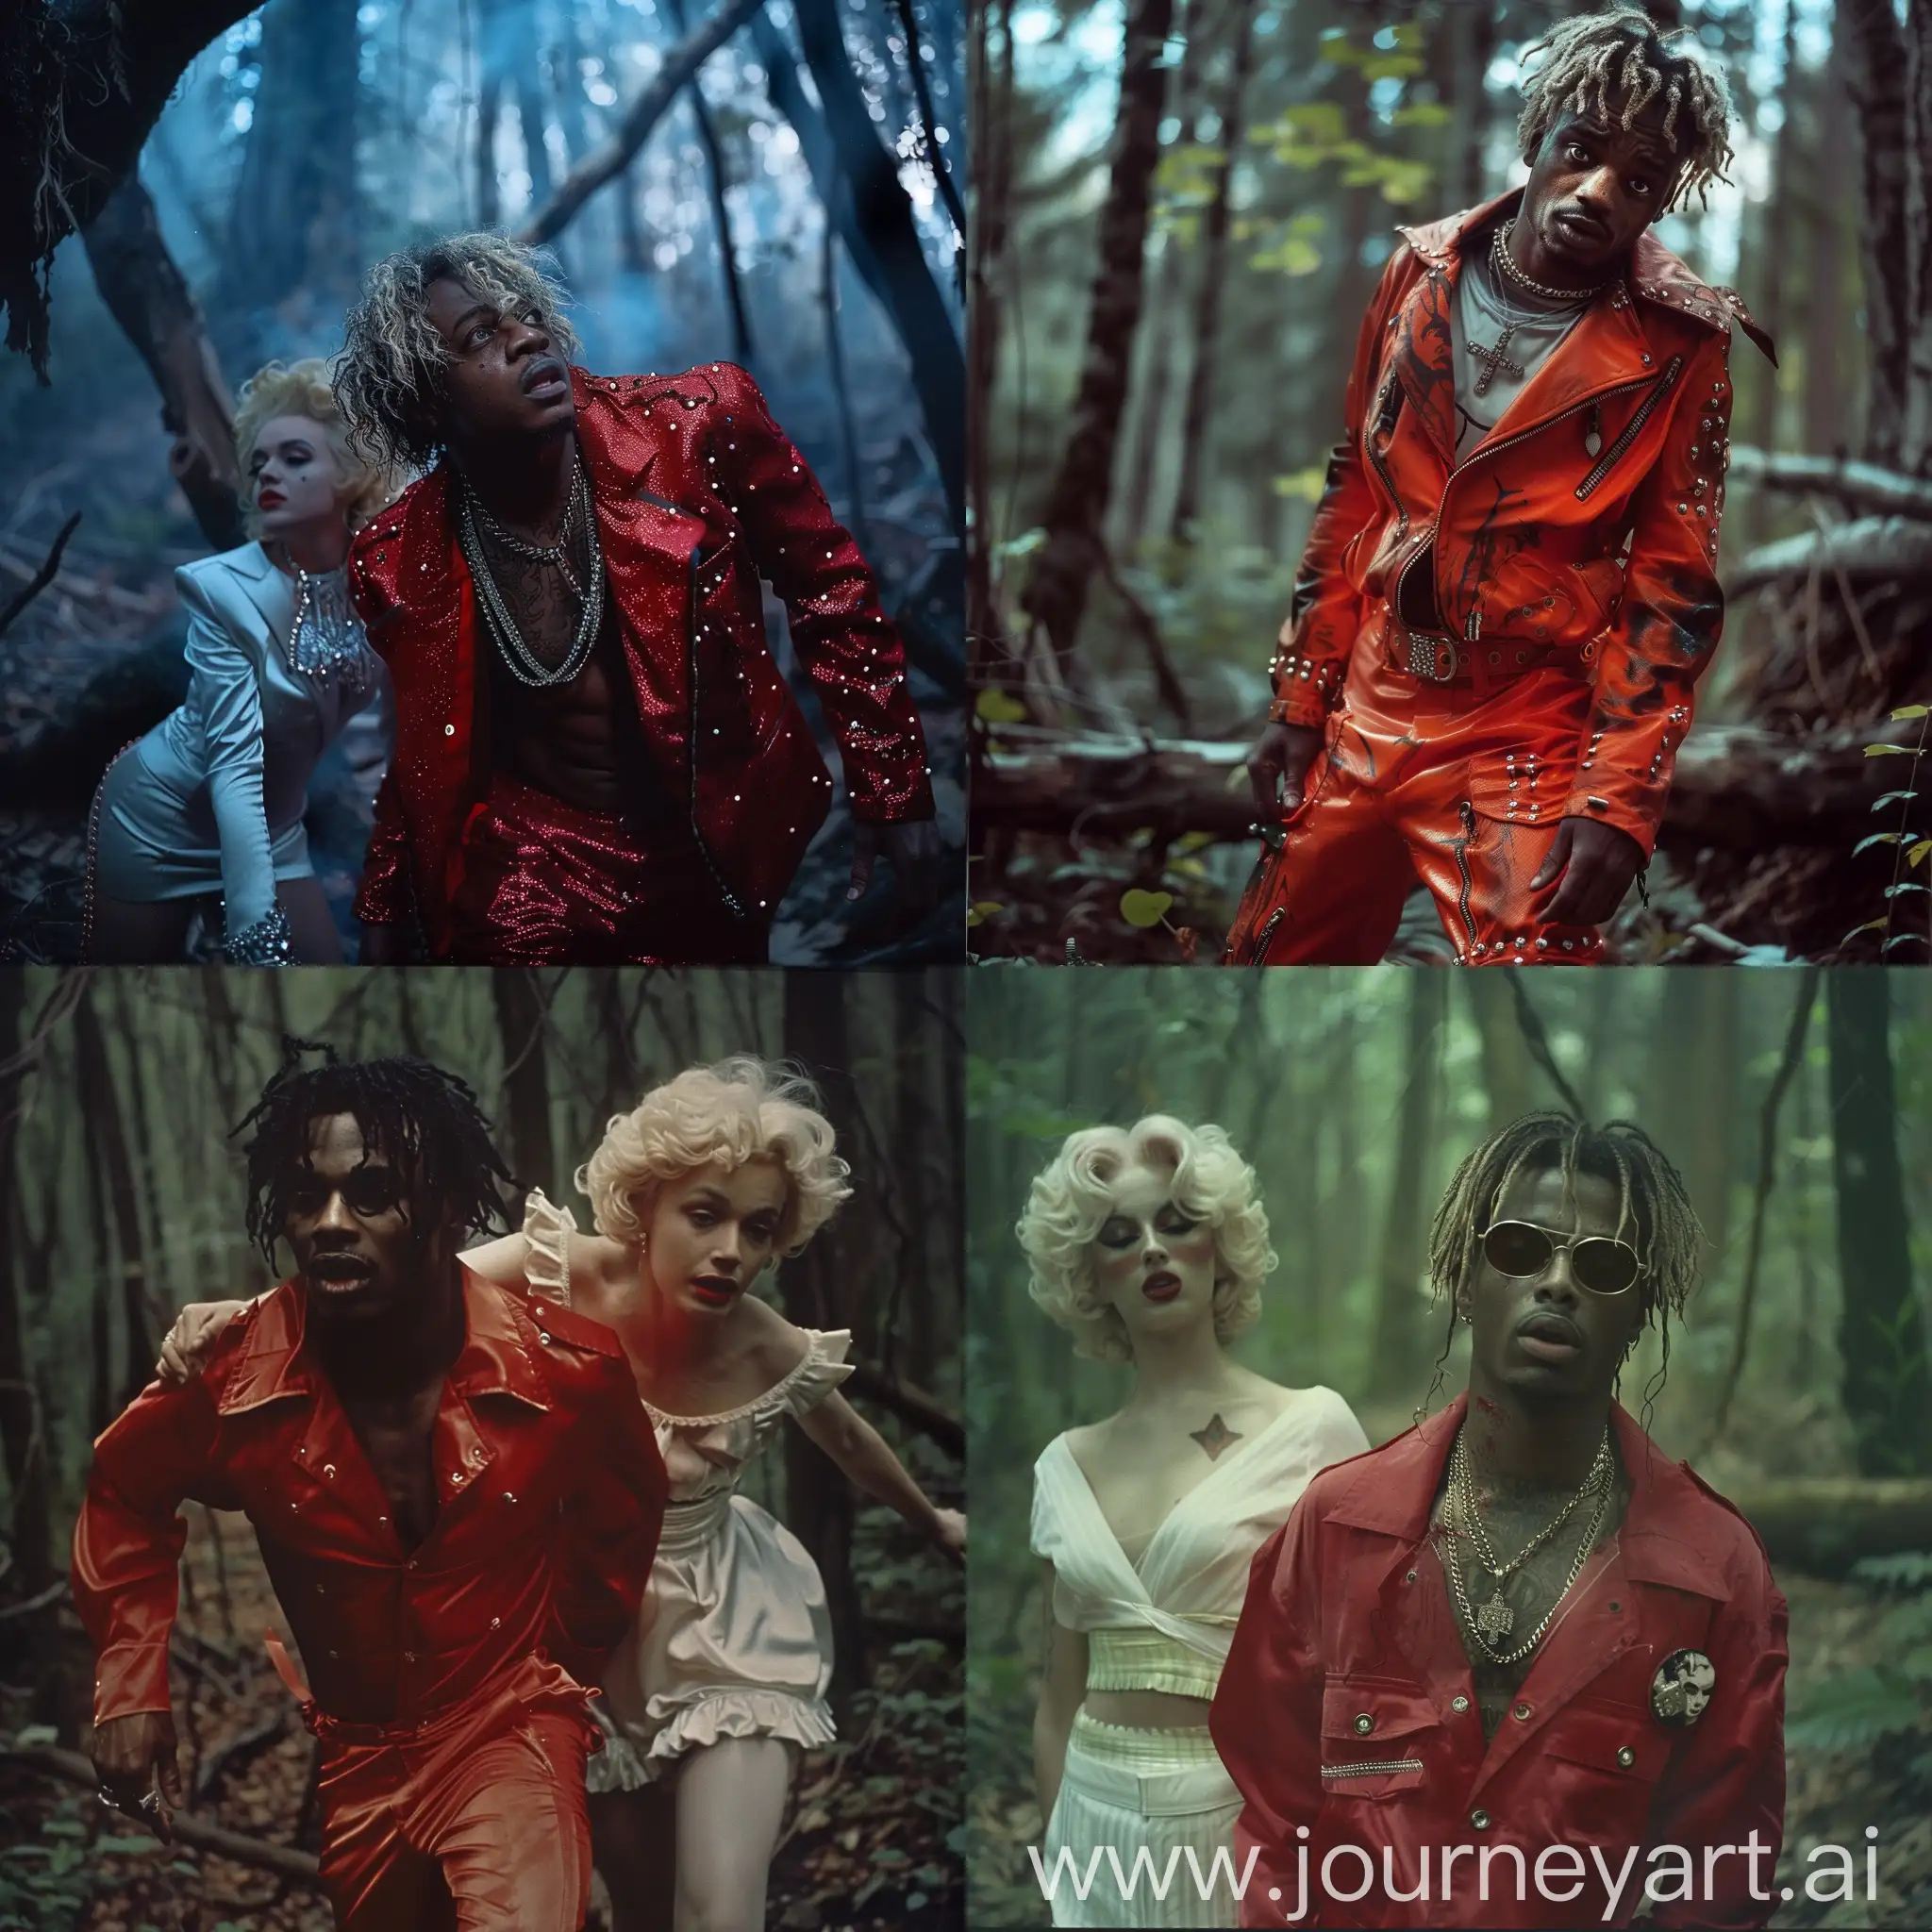 1980s-Movie-Scene-Juice-Wrld-in-Thriller-Outfit-with-Marilyn-Monroe-in-Forest